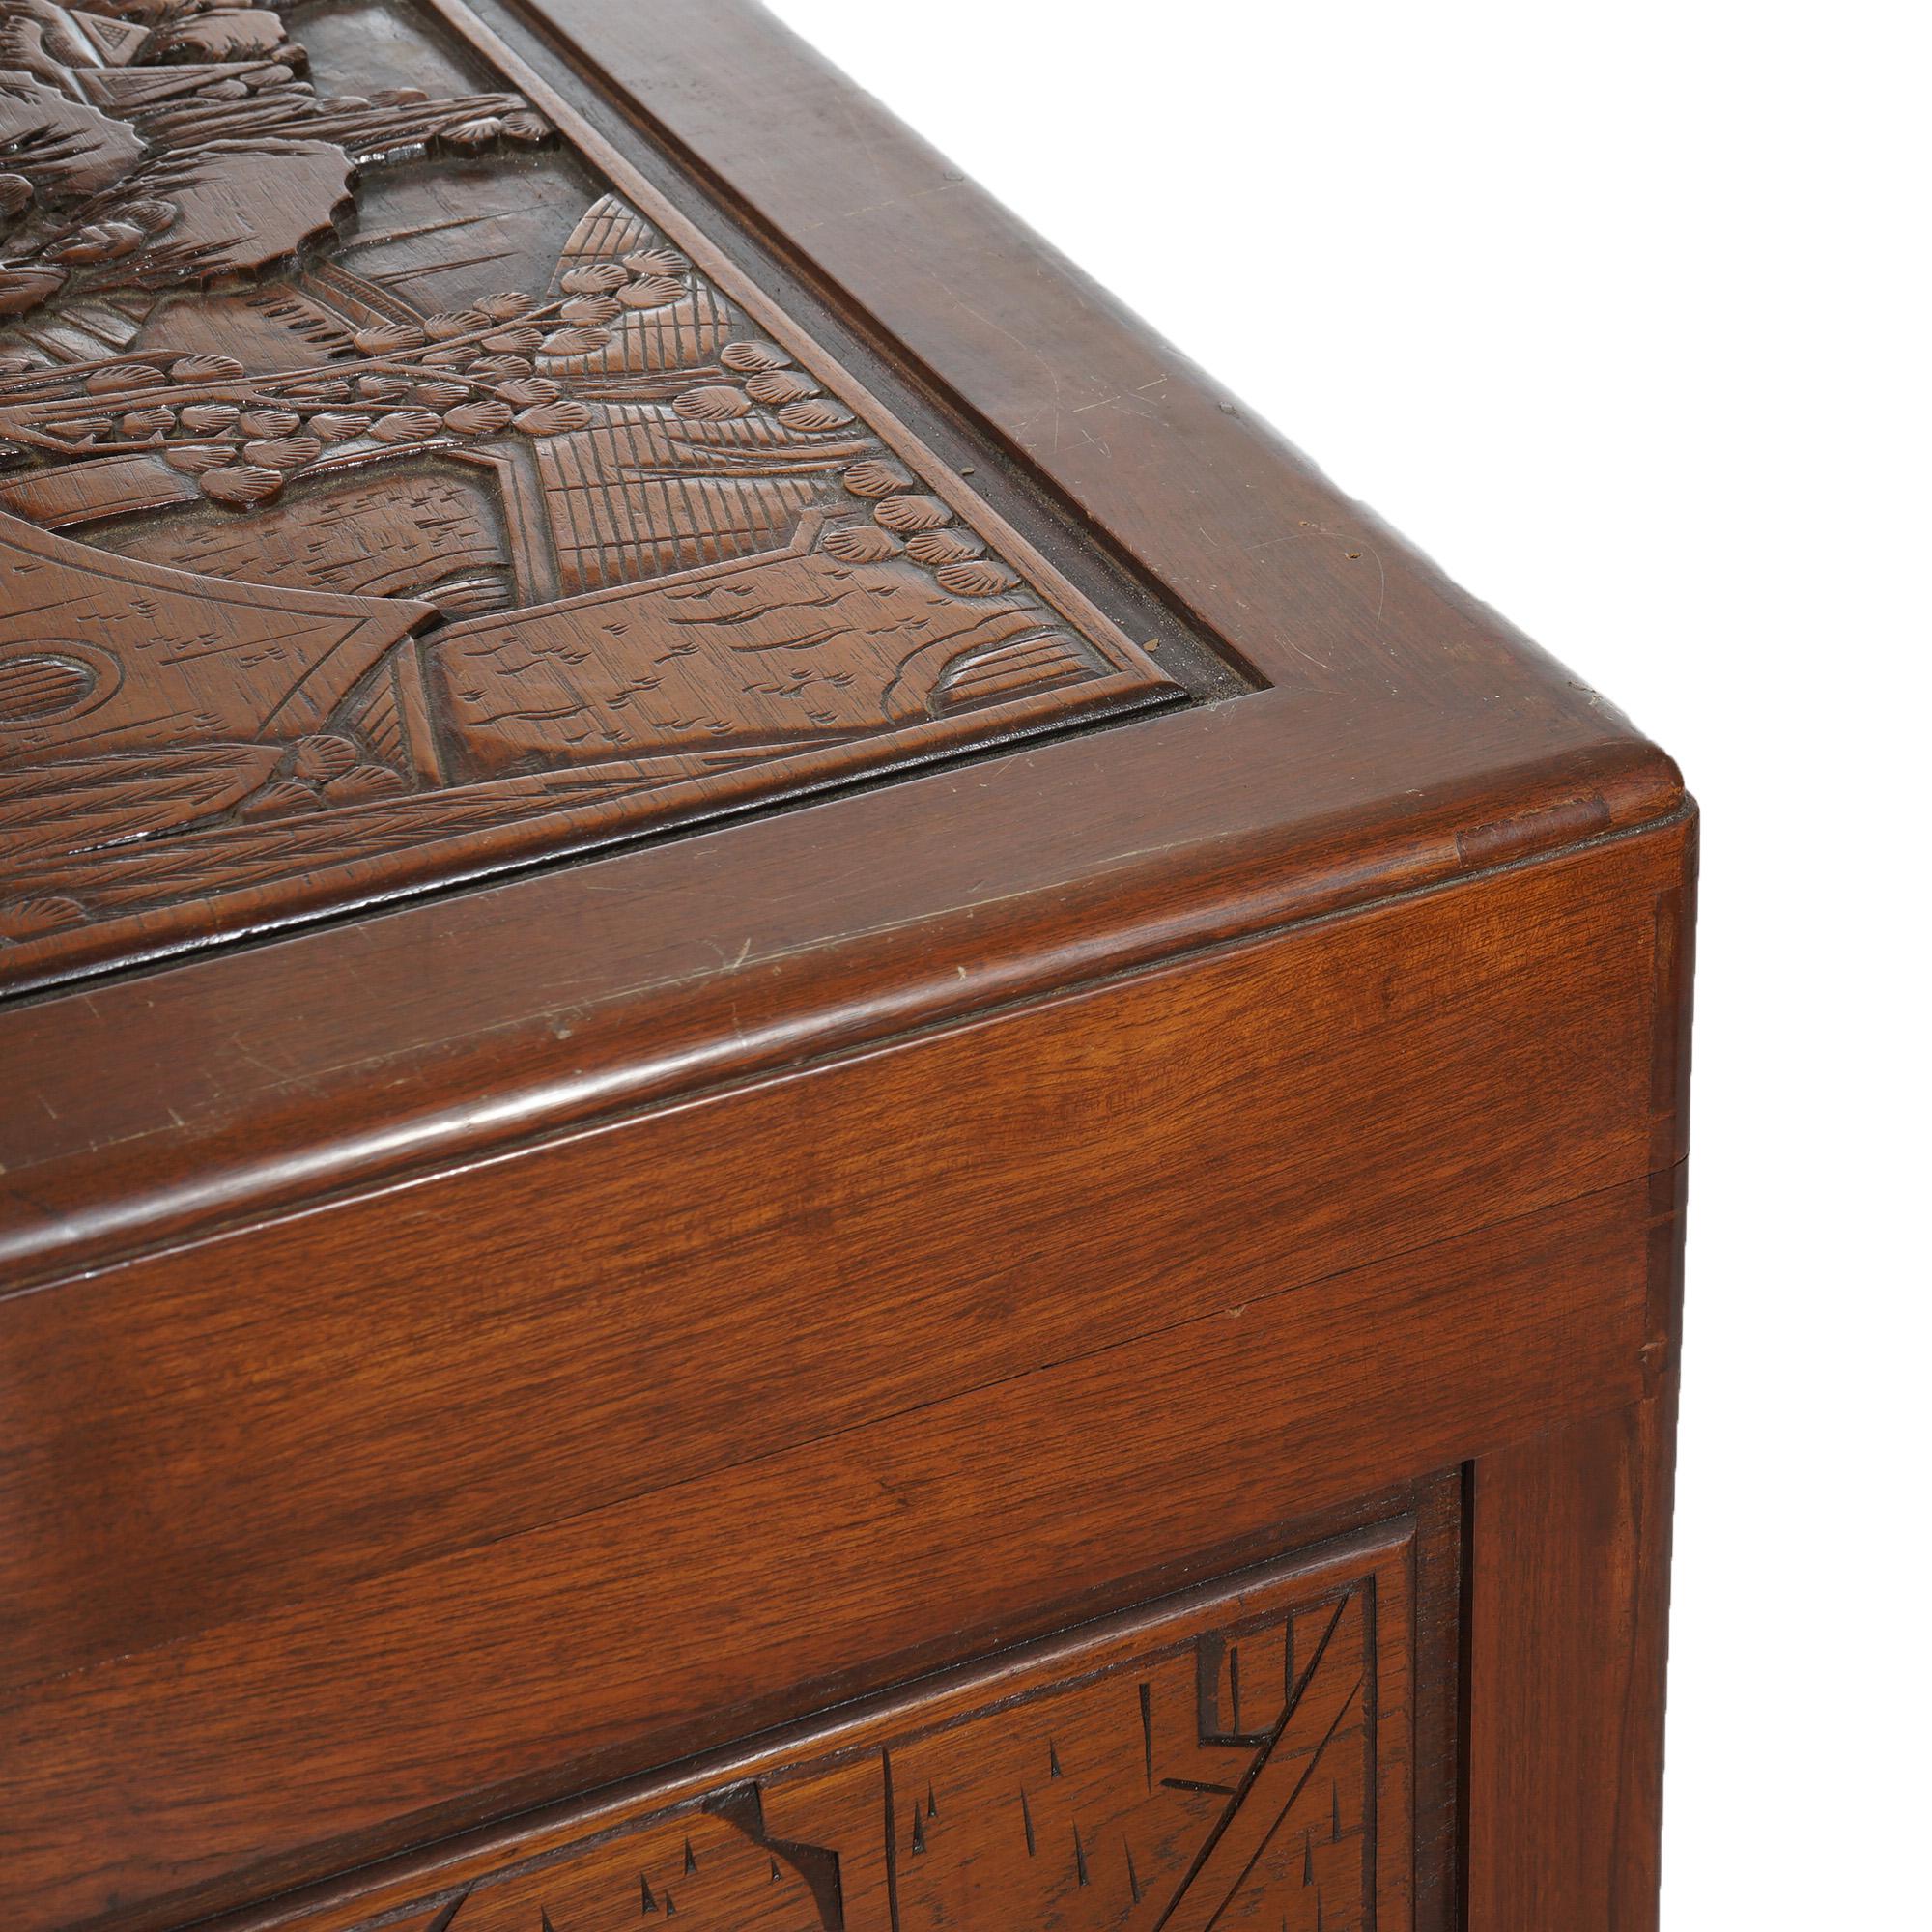 Chinese Carved Hardwood Figural Blanket Chest with Street Scene in Relief 20thC For Sale 9